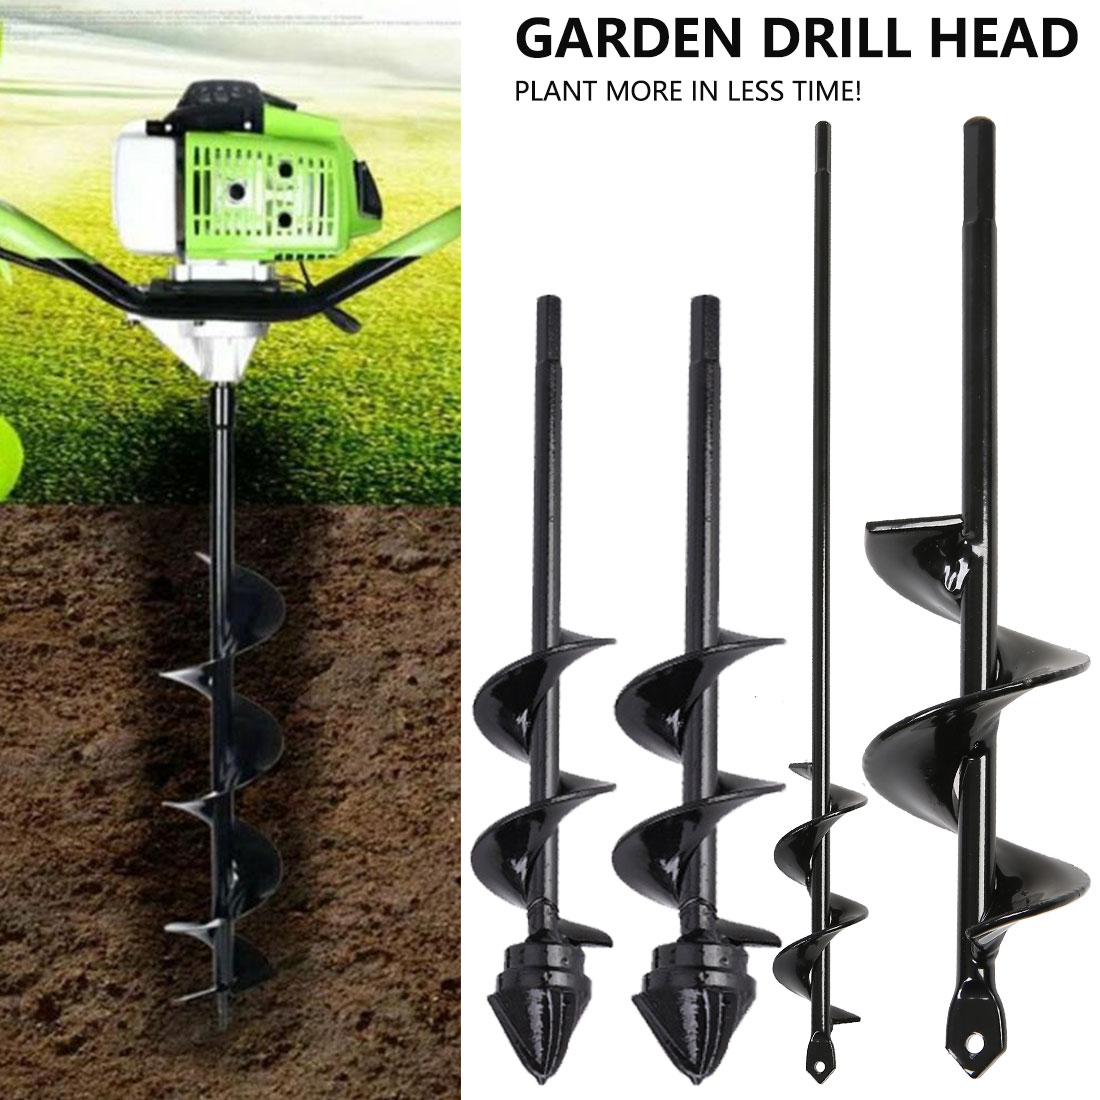 Power Garden Spiral Plant Auger Earth Planter Drill Bit Post Hole Digger Tool AU 